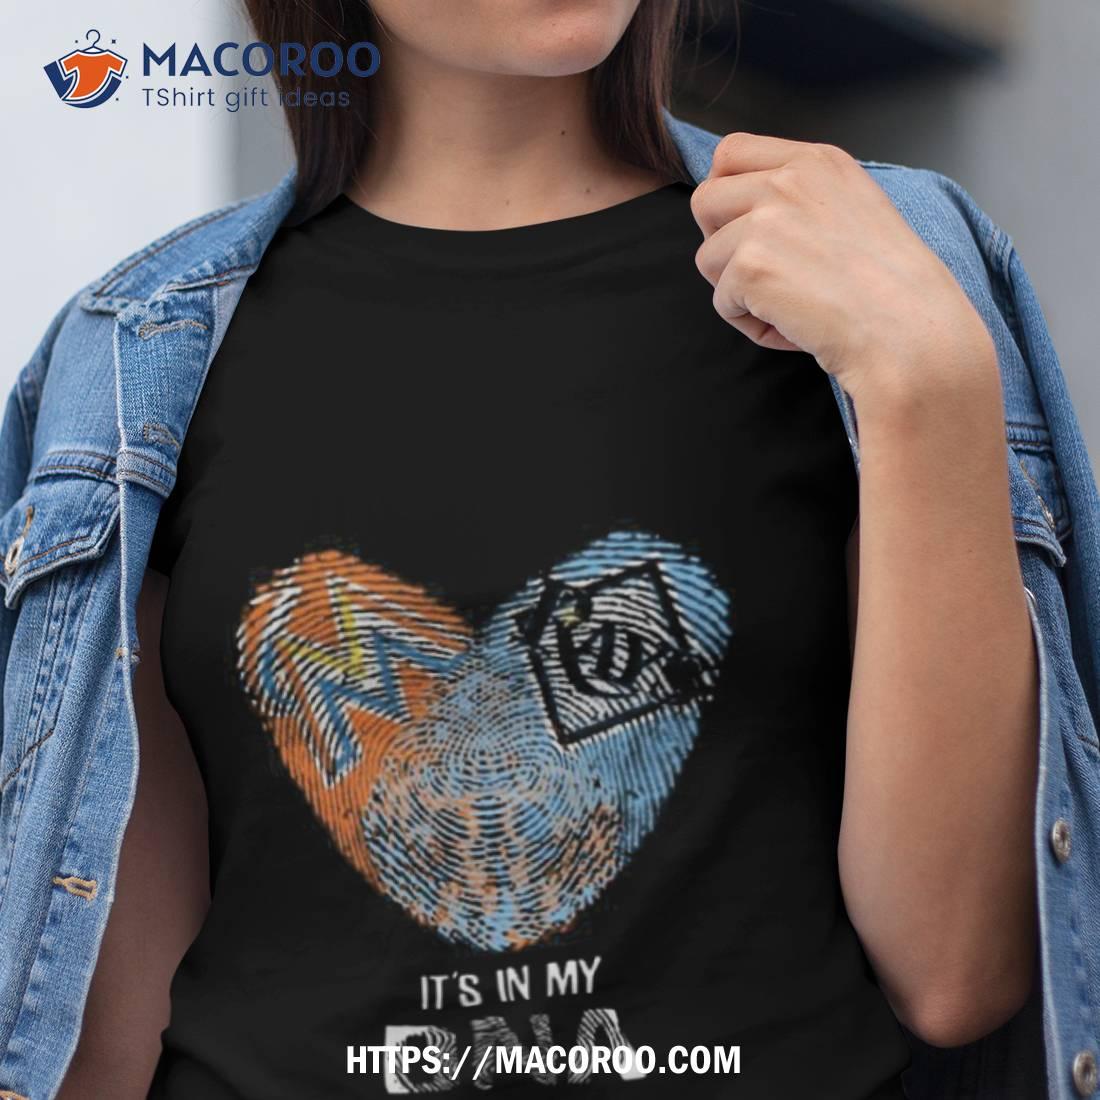 Miami Marlins T-Shirt: Show Your Team Spirit in Style